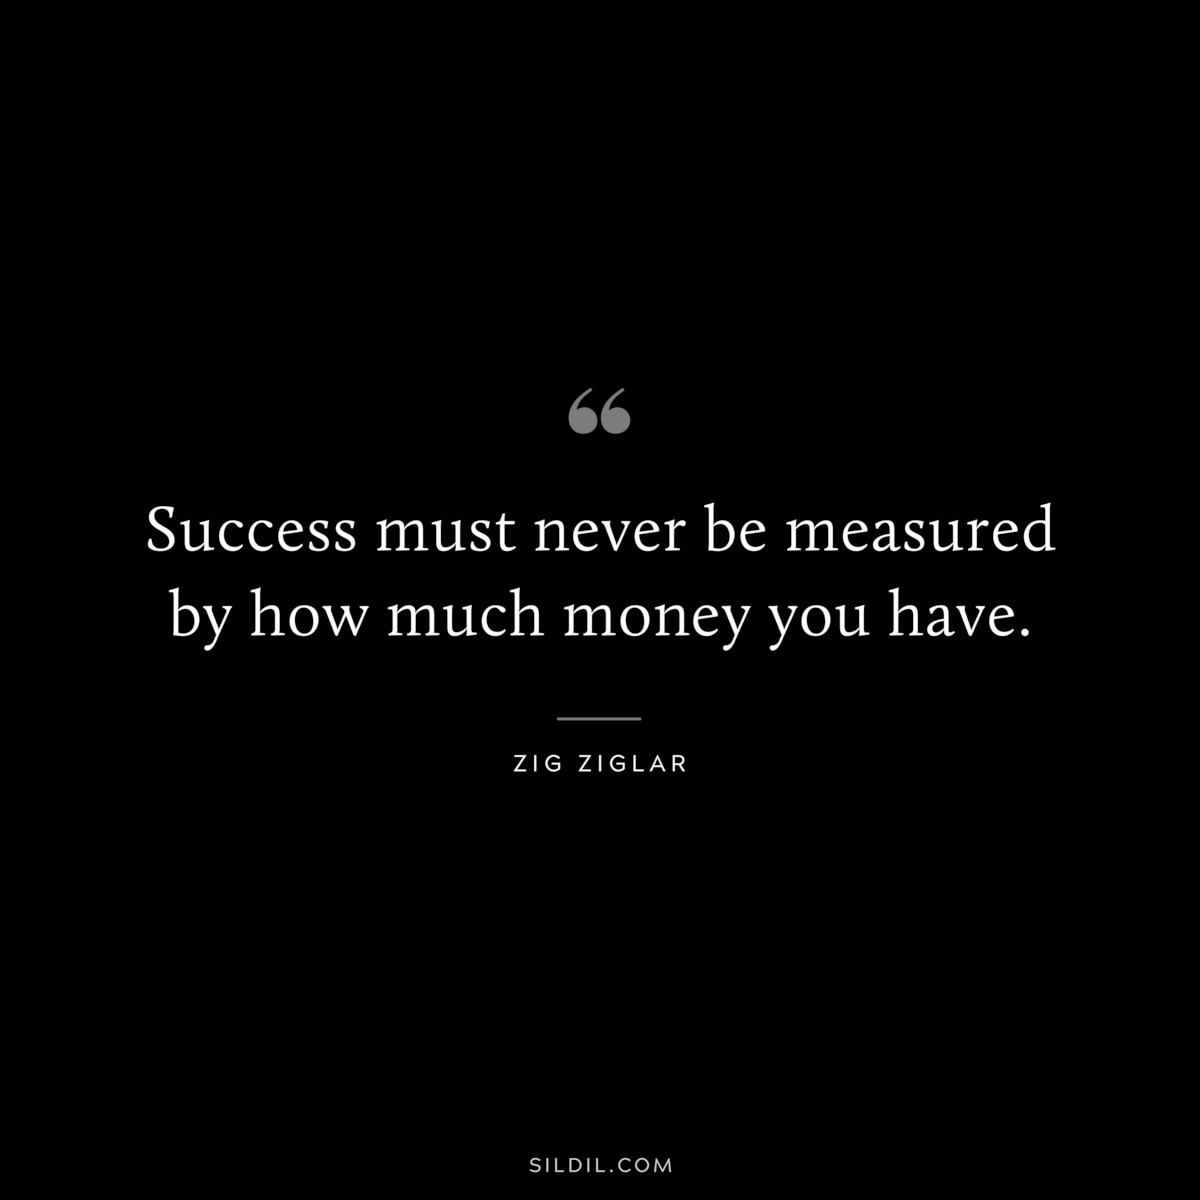 Success must never be measured by how much money you have. ― Zig Ziglar